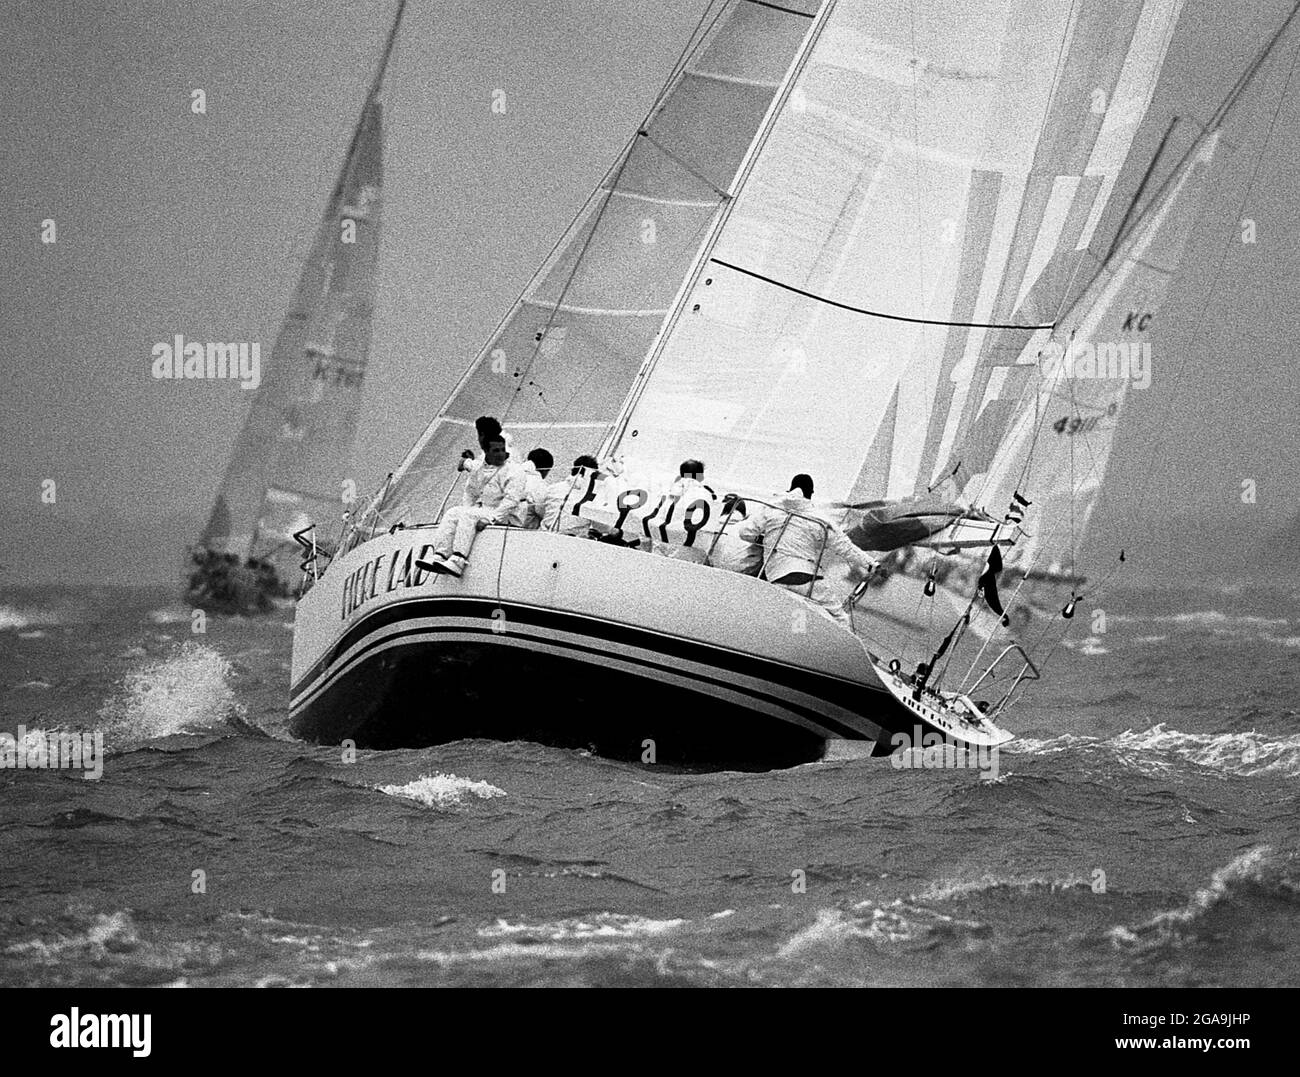 AJAXNETPHOTO. 1985. SOLENT, ENGLAND. - CHANNEL RACE START - FRENCH ADMIRAL'S CUP TEAM YACHT FIERE LADY IN ROUGH WEATHER AT THE START. PHOTO:JONATHAN EASTLAND/AJAX REF:CHR85 11A 16 Stock Photo